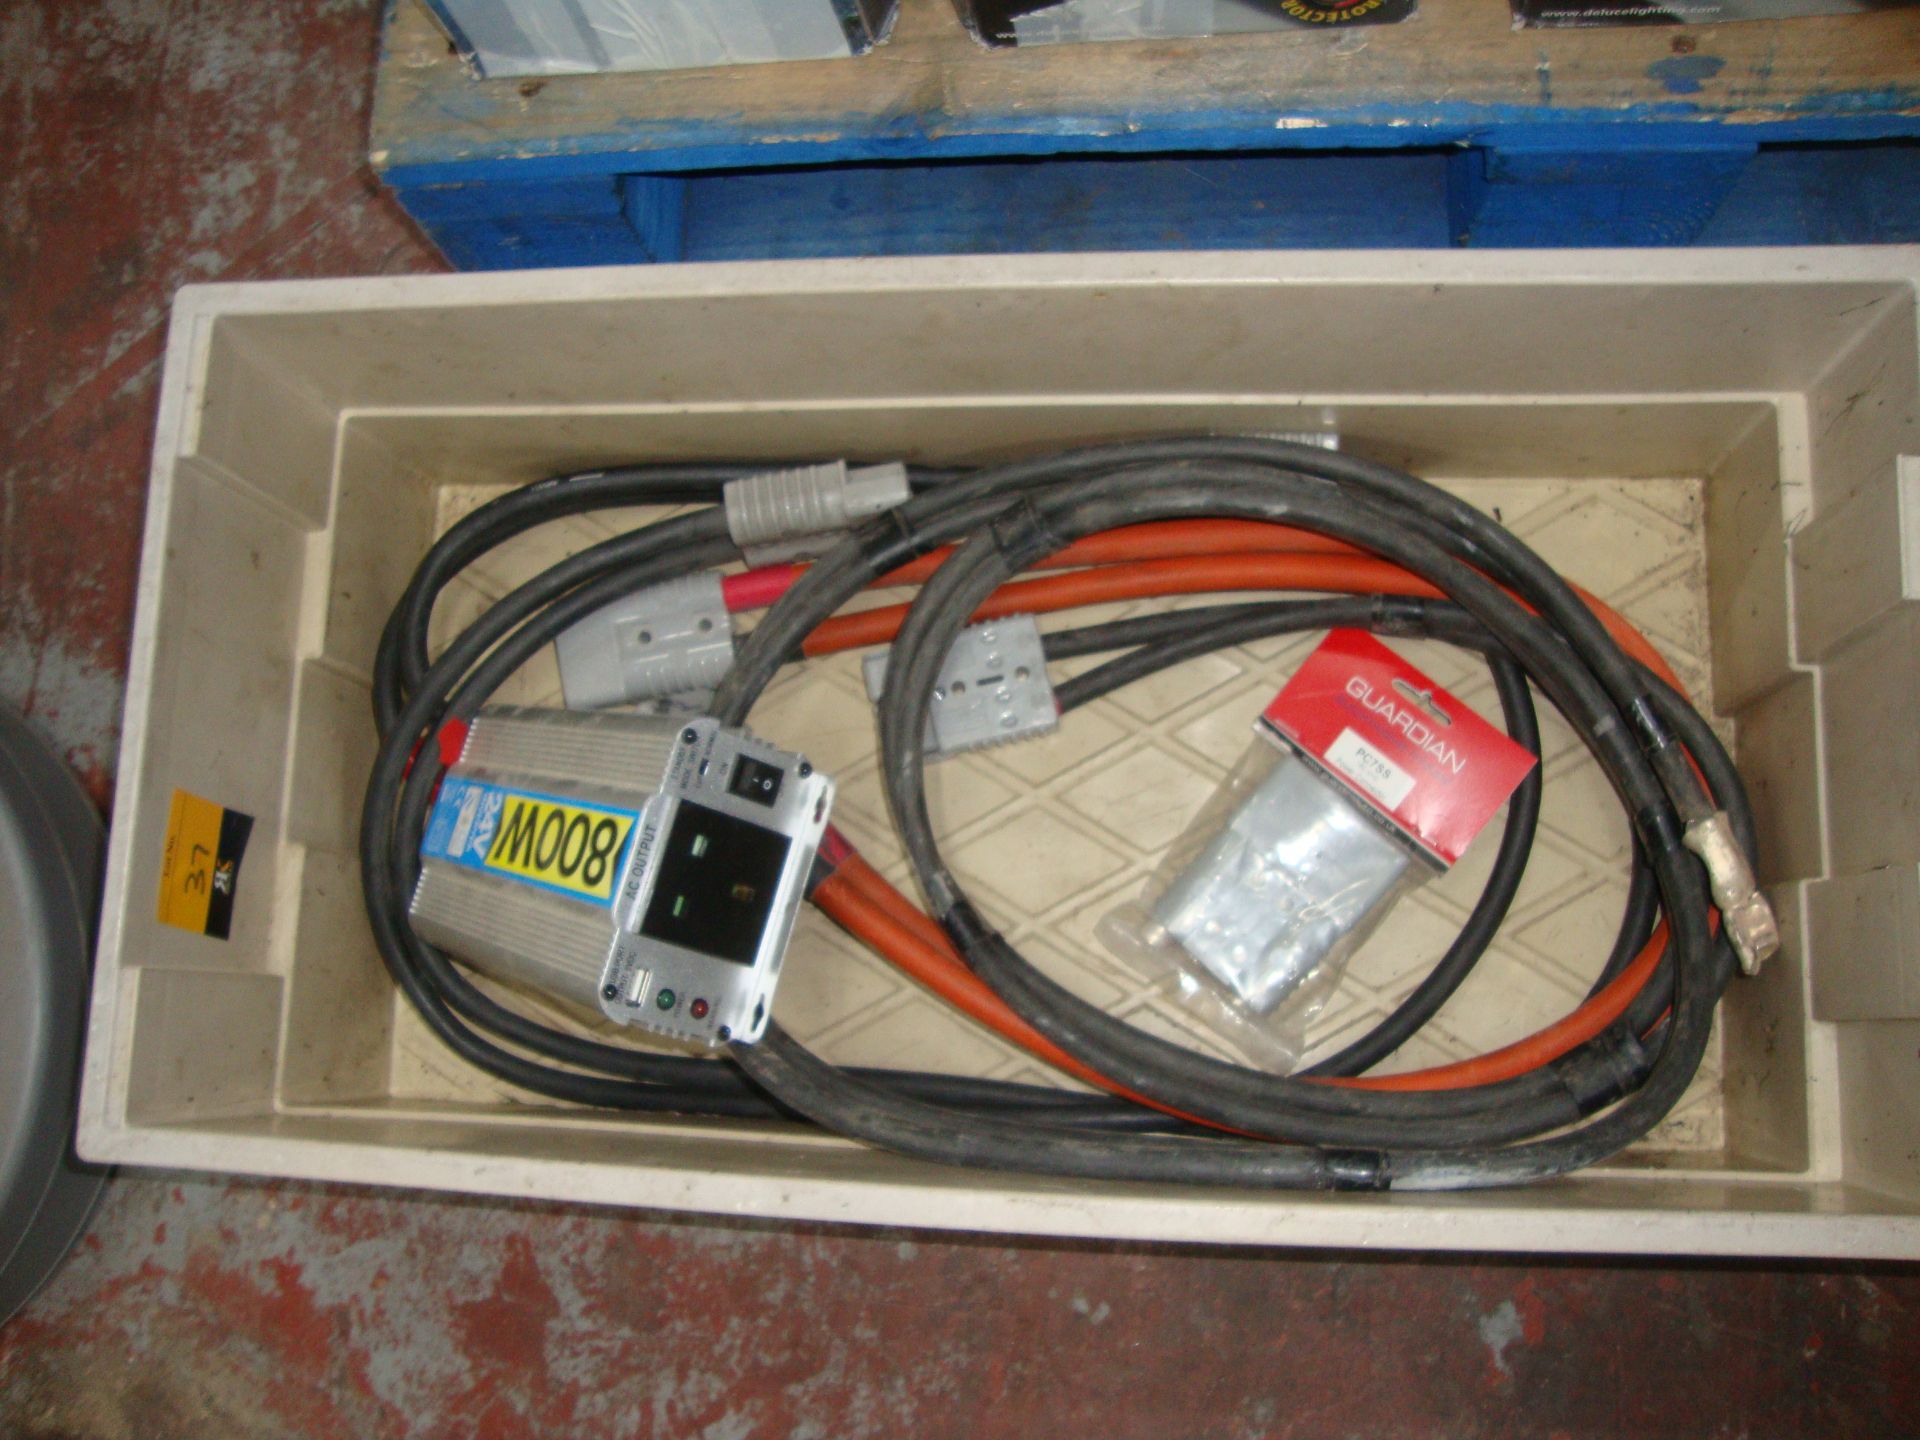 24 Volt inverter with charging leads as pictured IMPORTANT: Please remember goods successfully bid